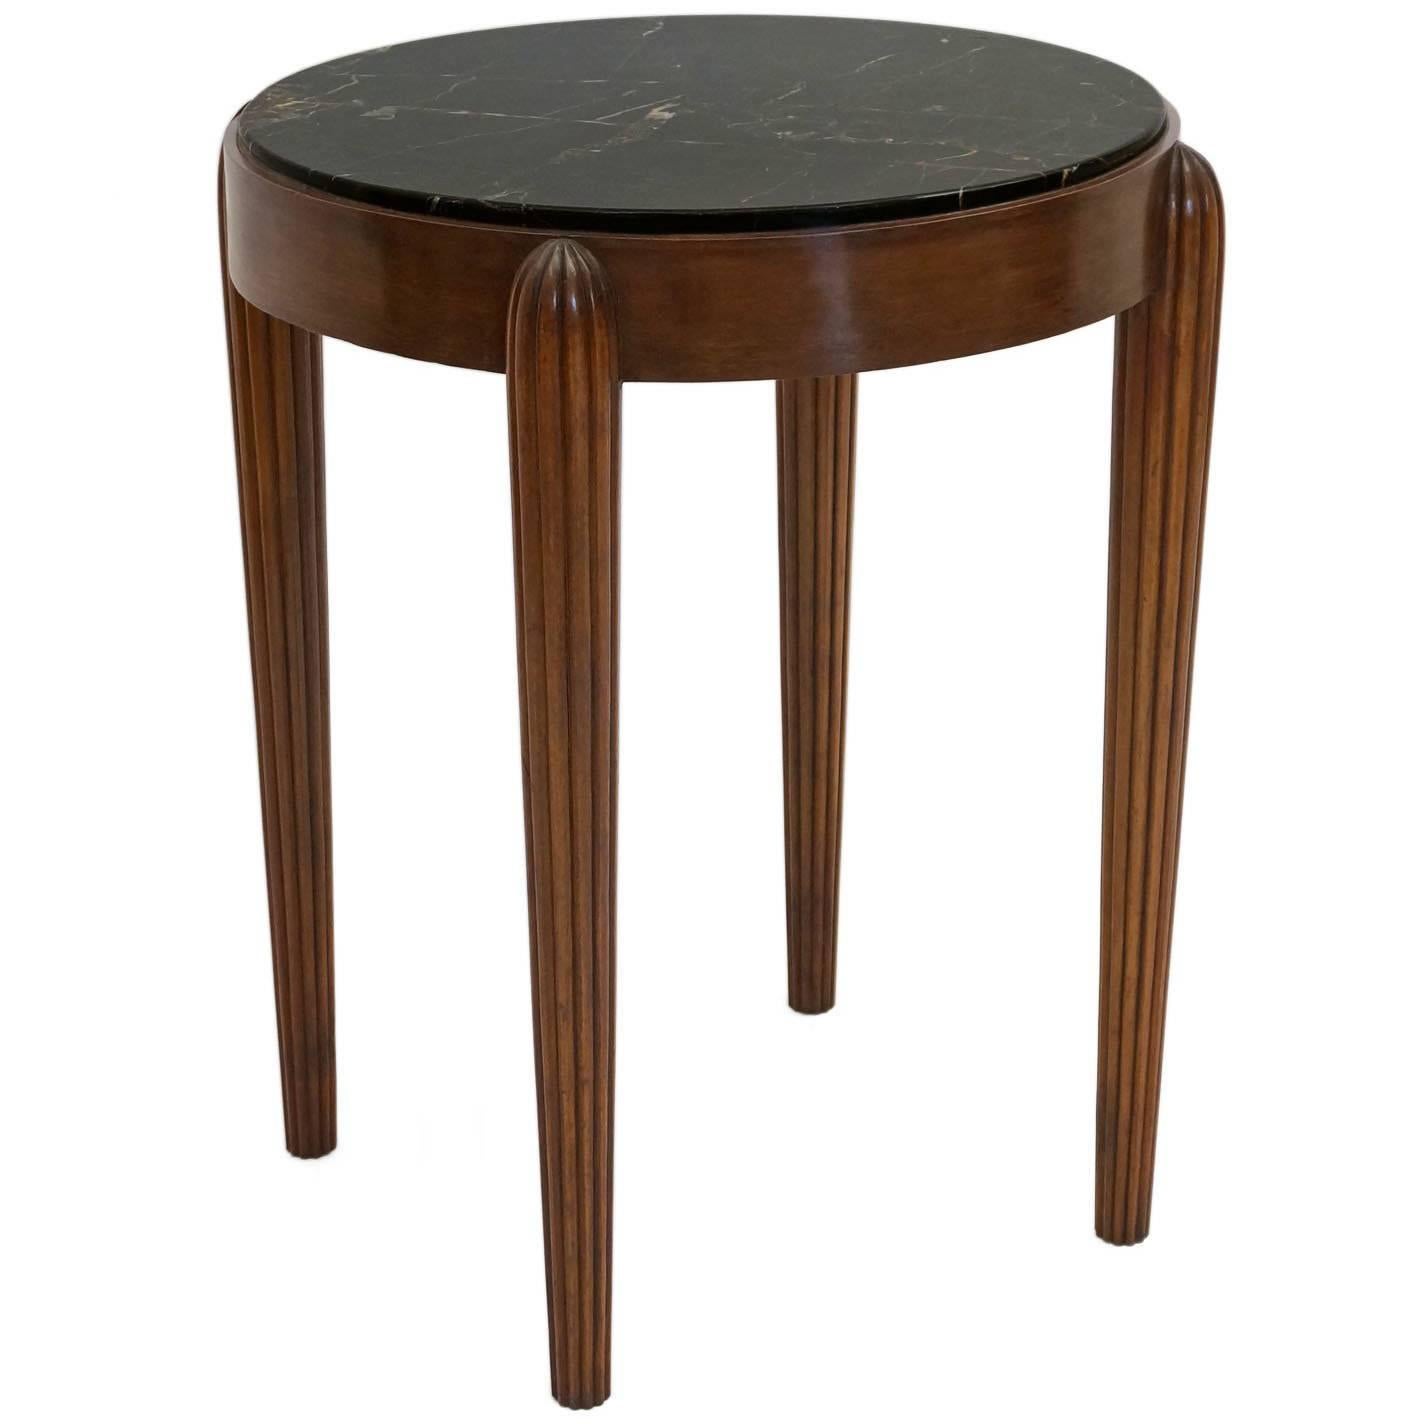 French Art Deco Circular Side Table with Black Marble Top For Sale